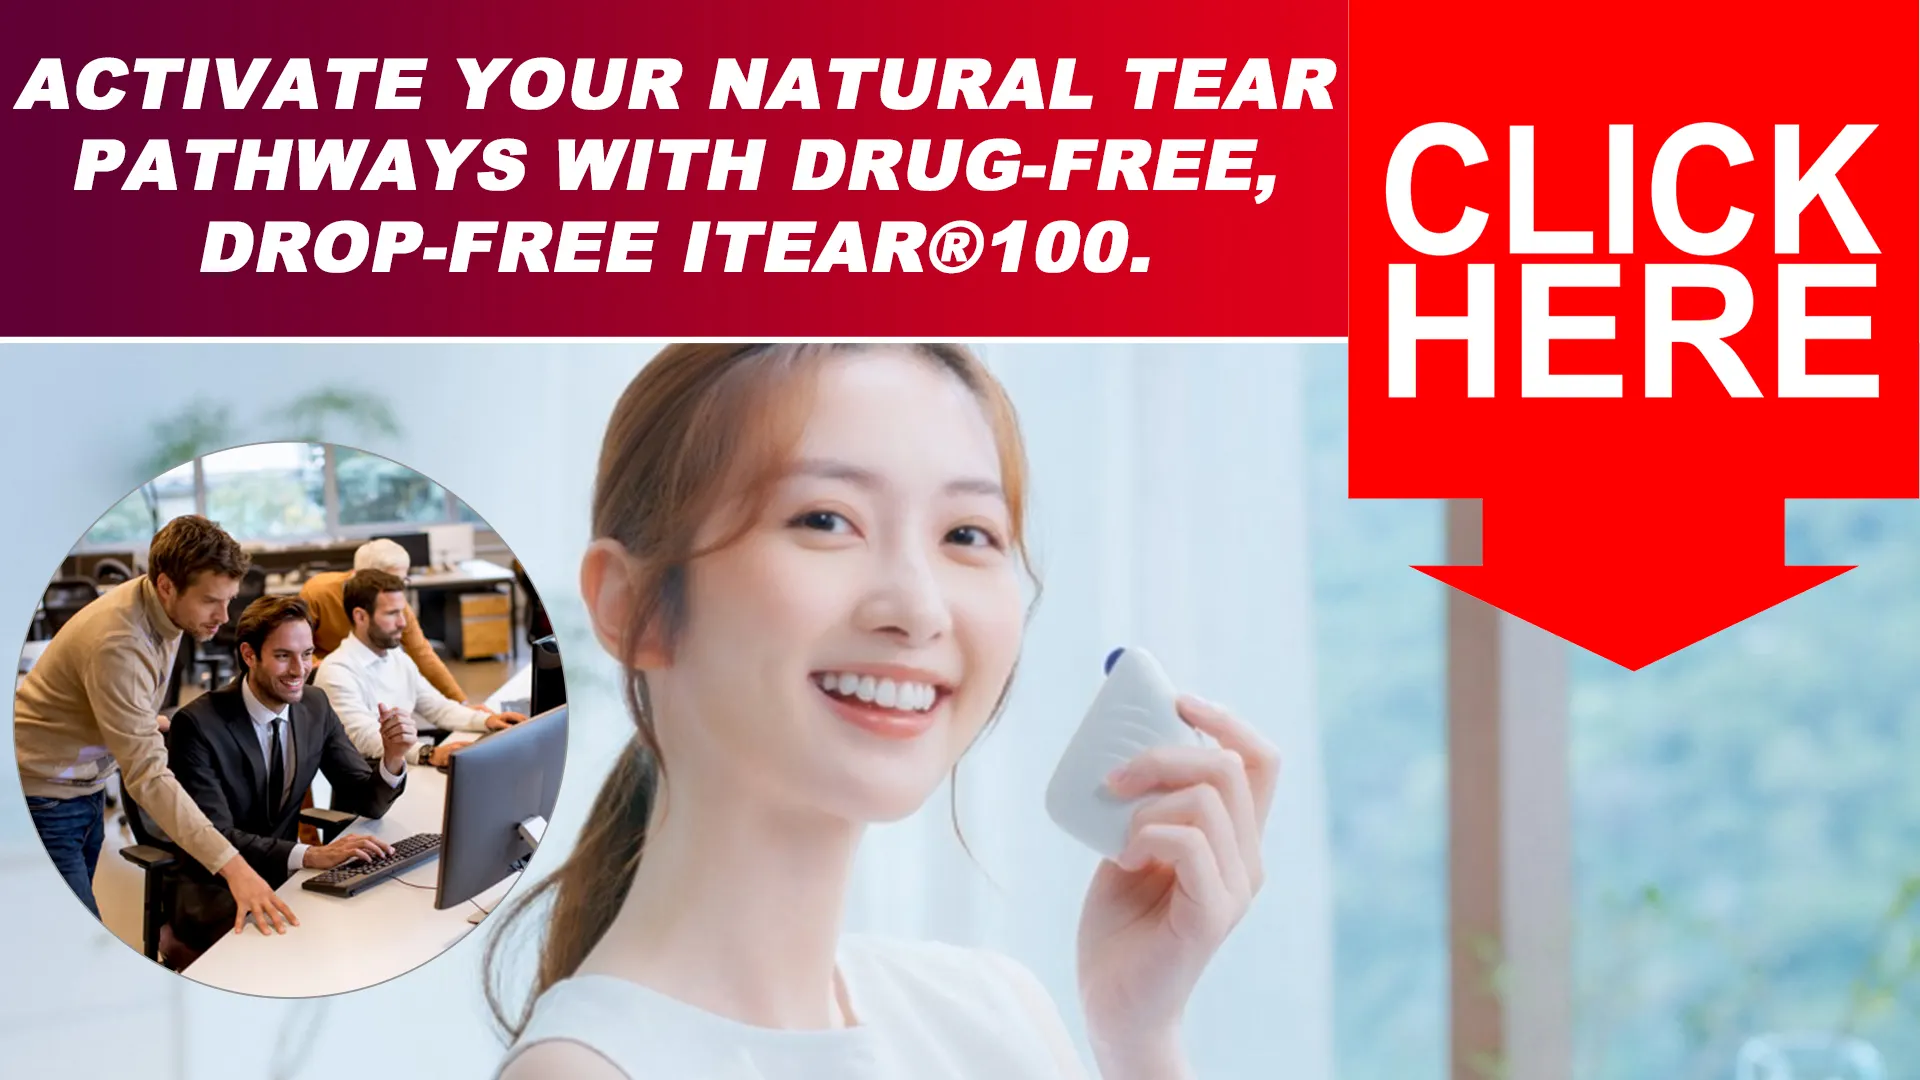 Benefits of Combining Humidifiers with iTEAR100